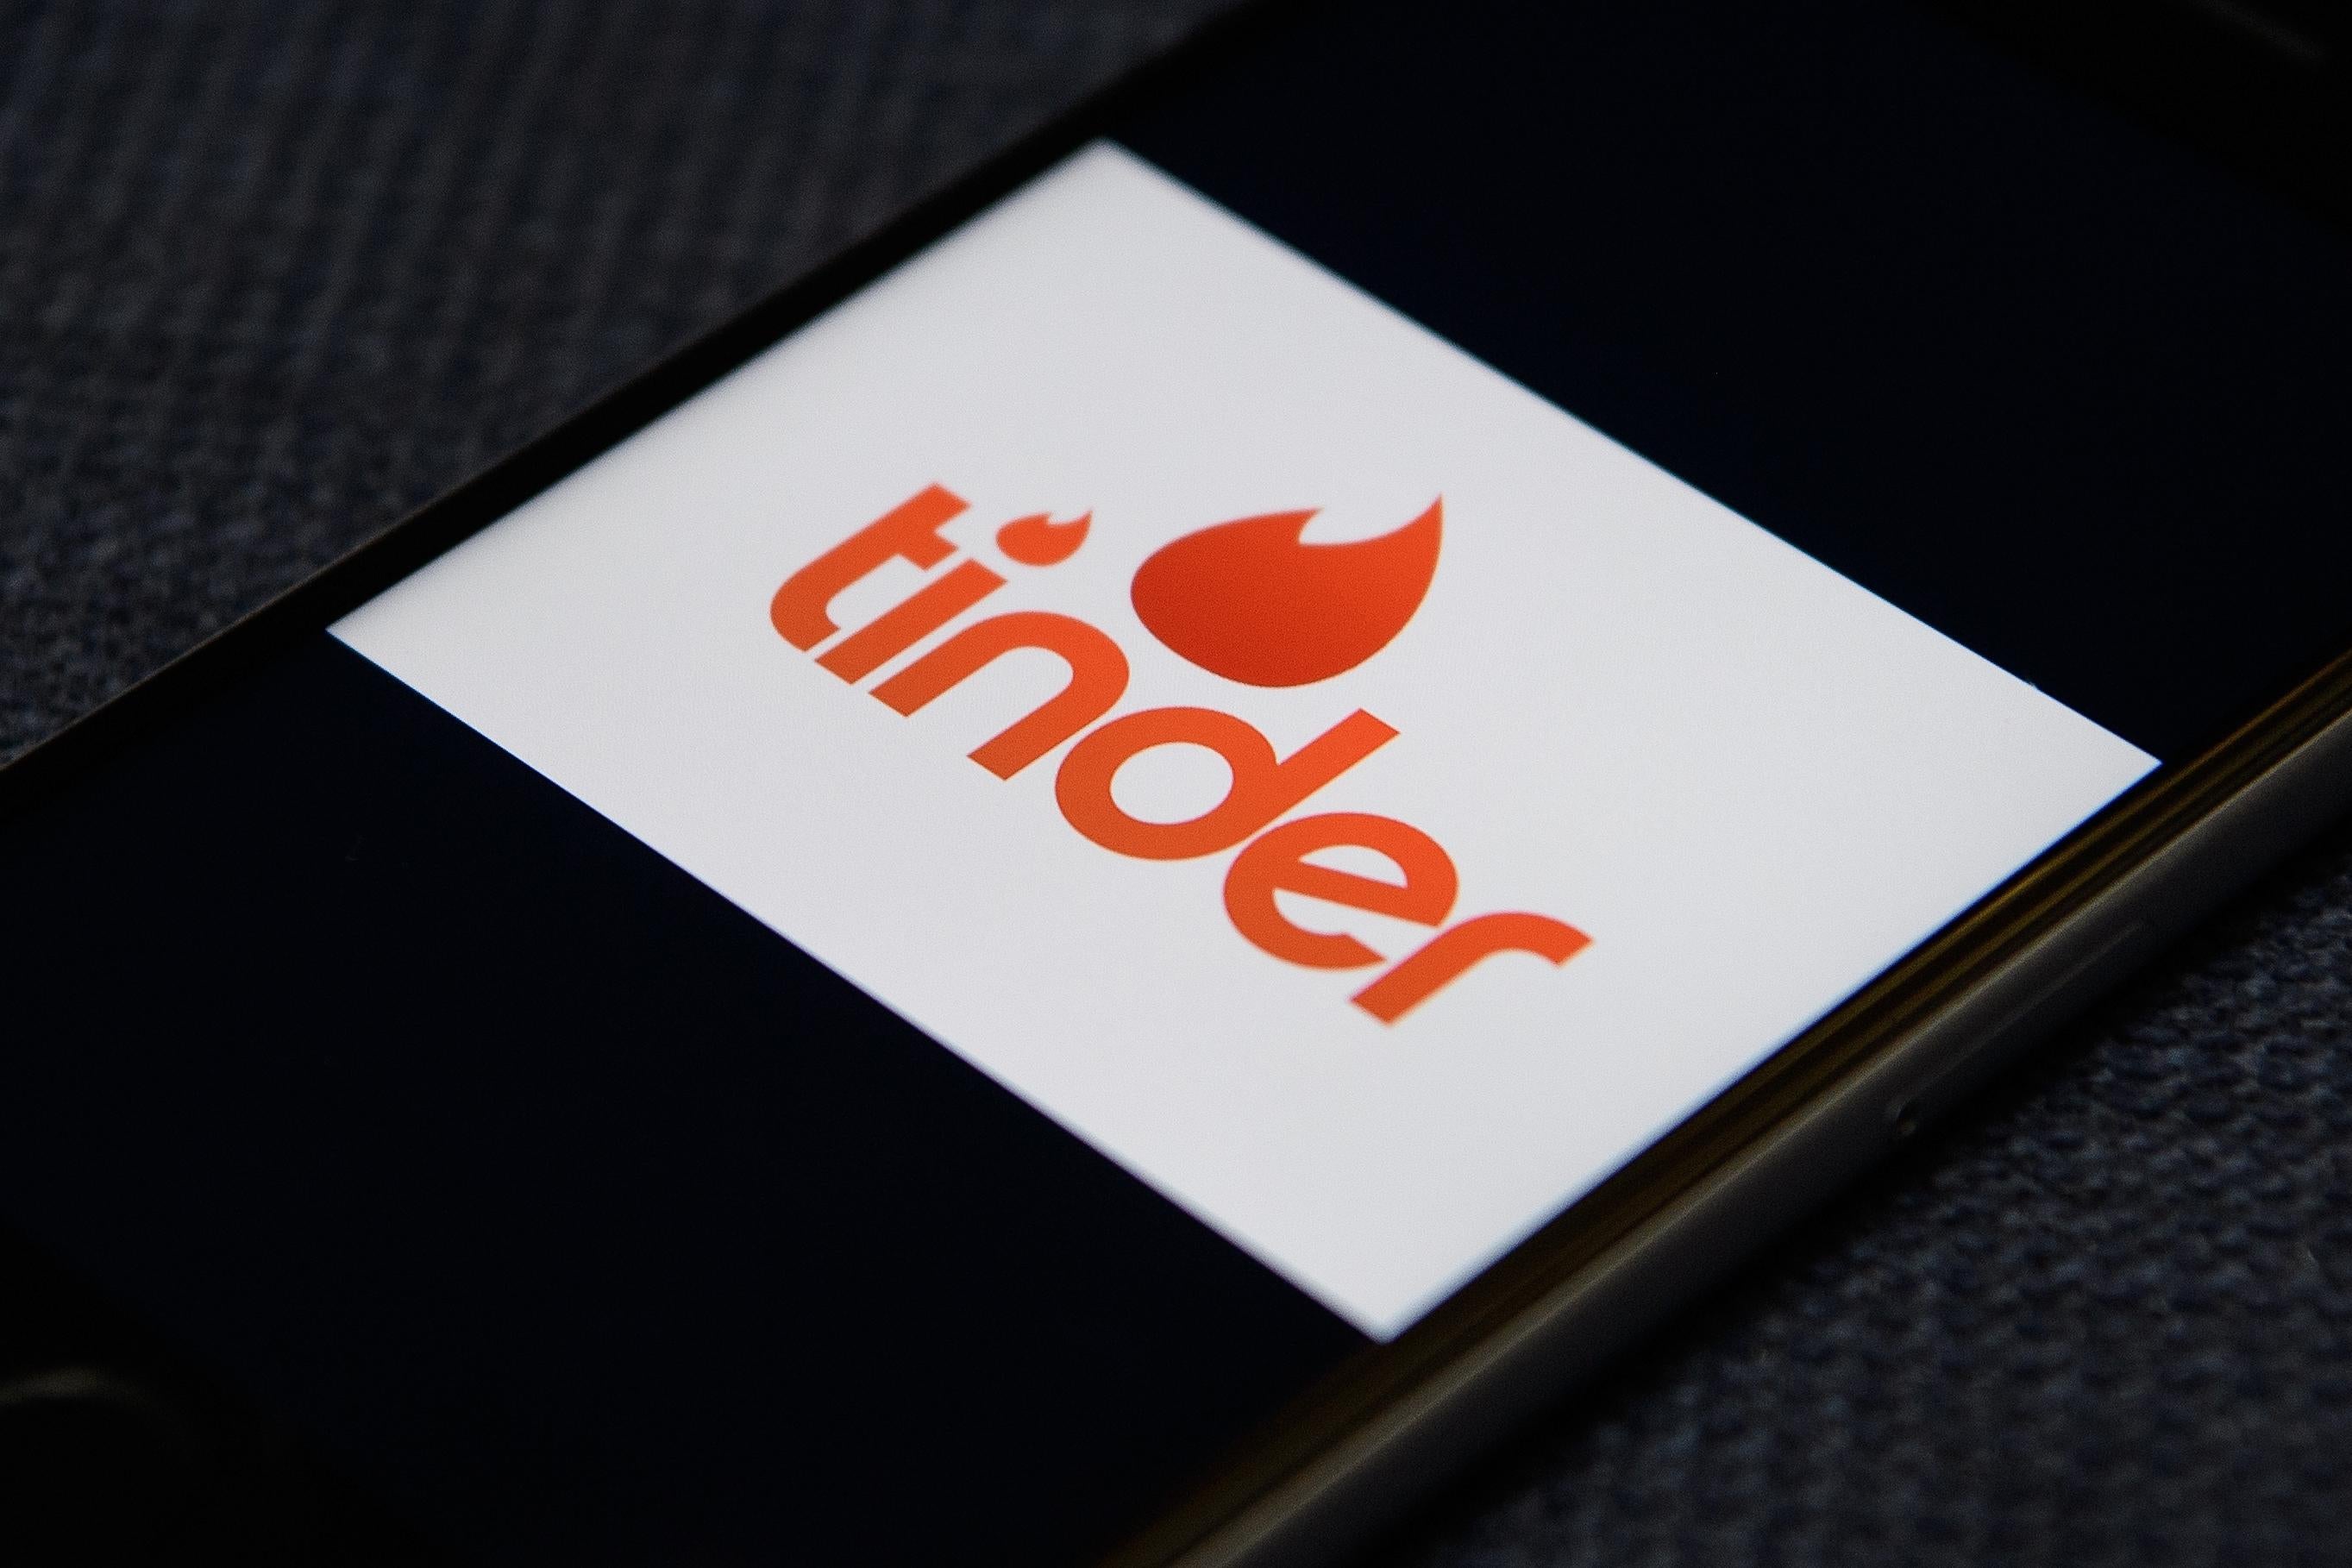 The Tinder app logo is seen on a mobile phone screen.